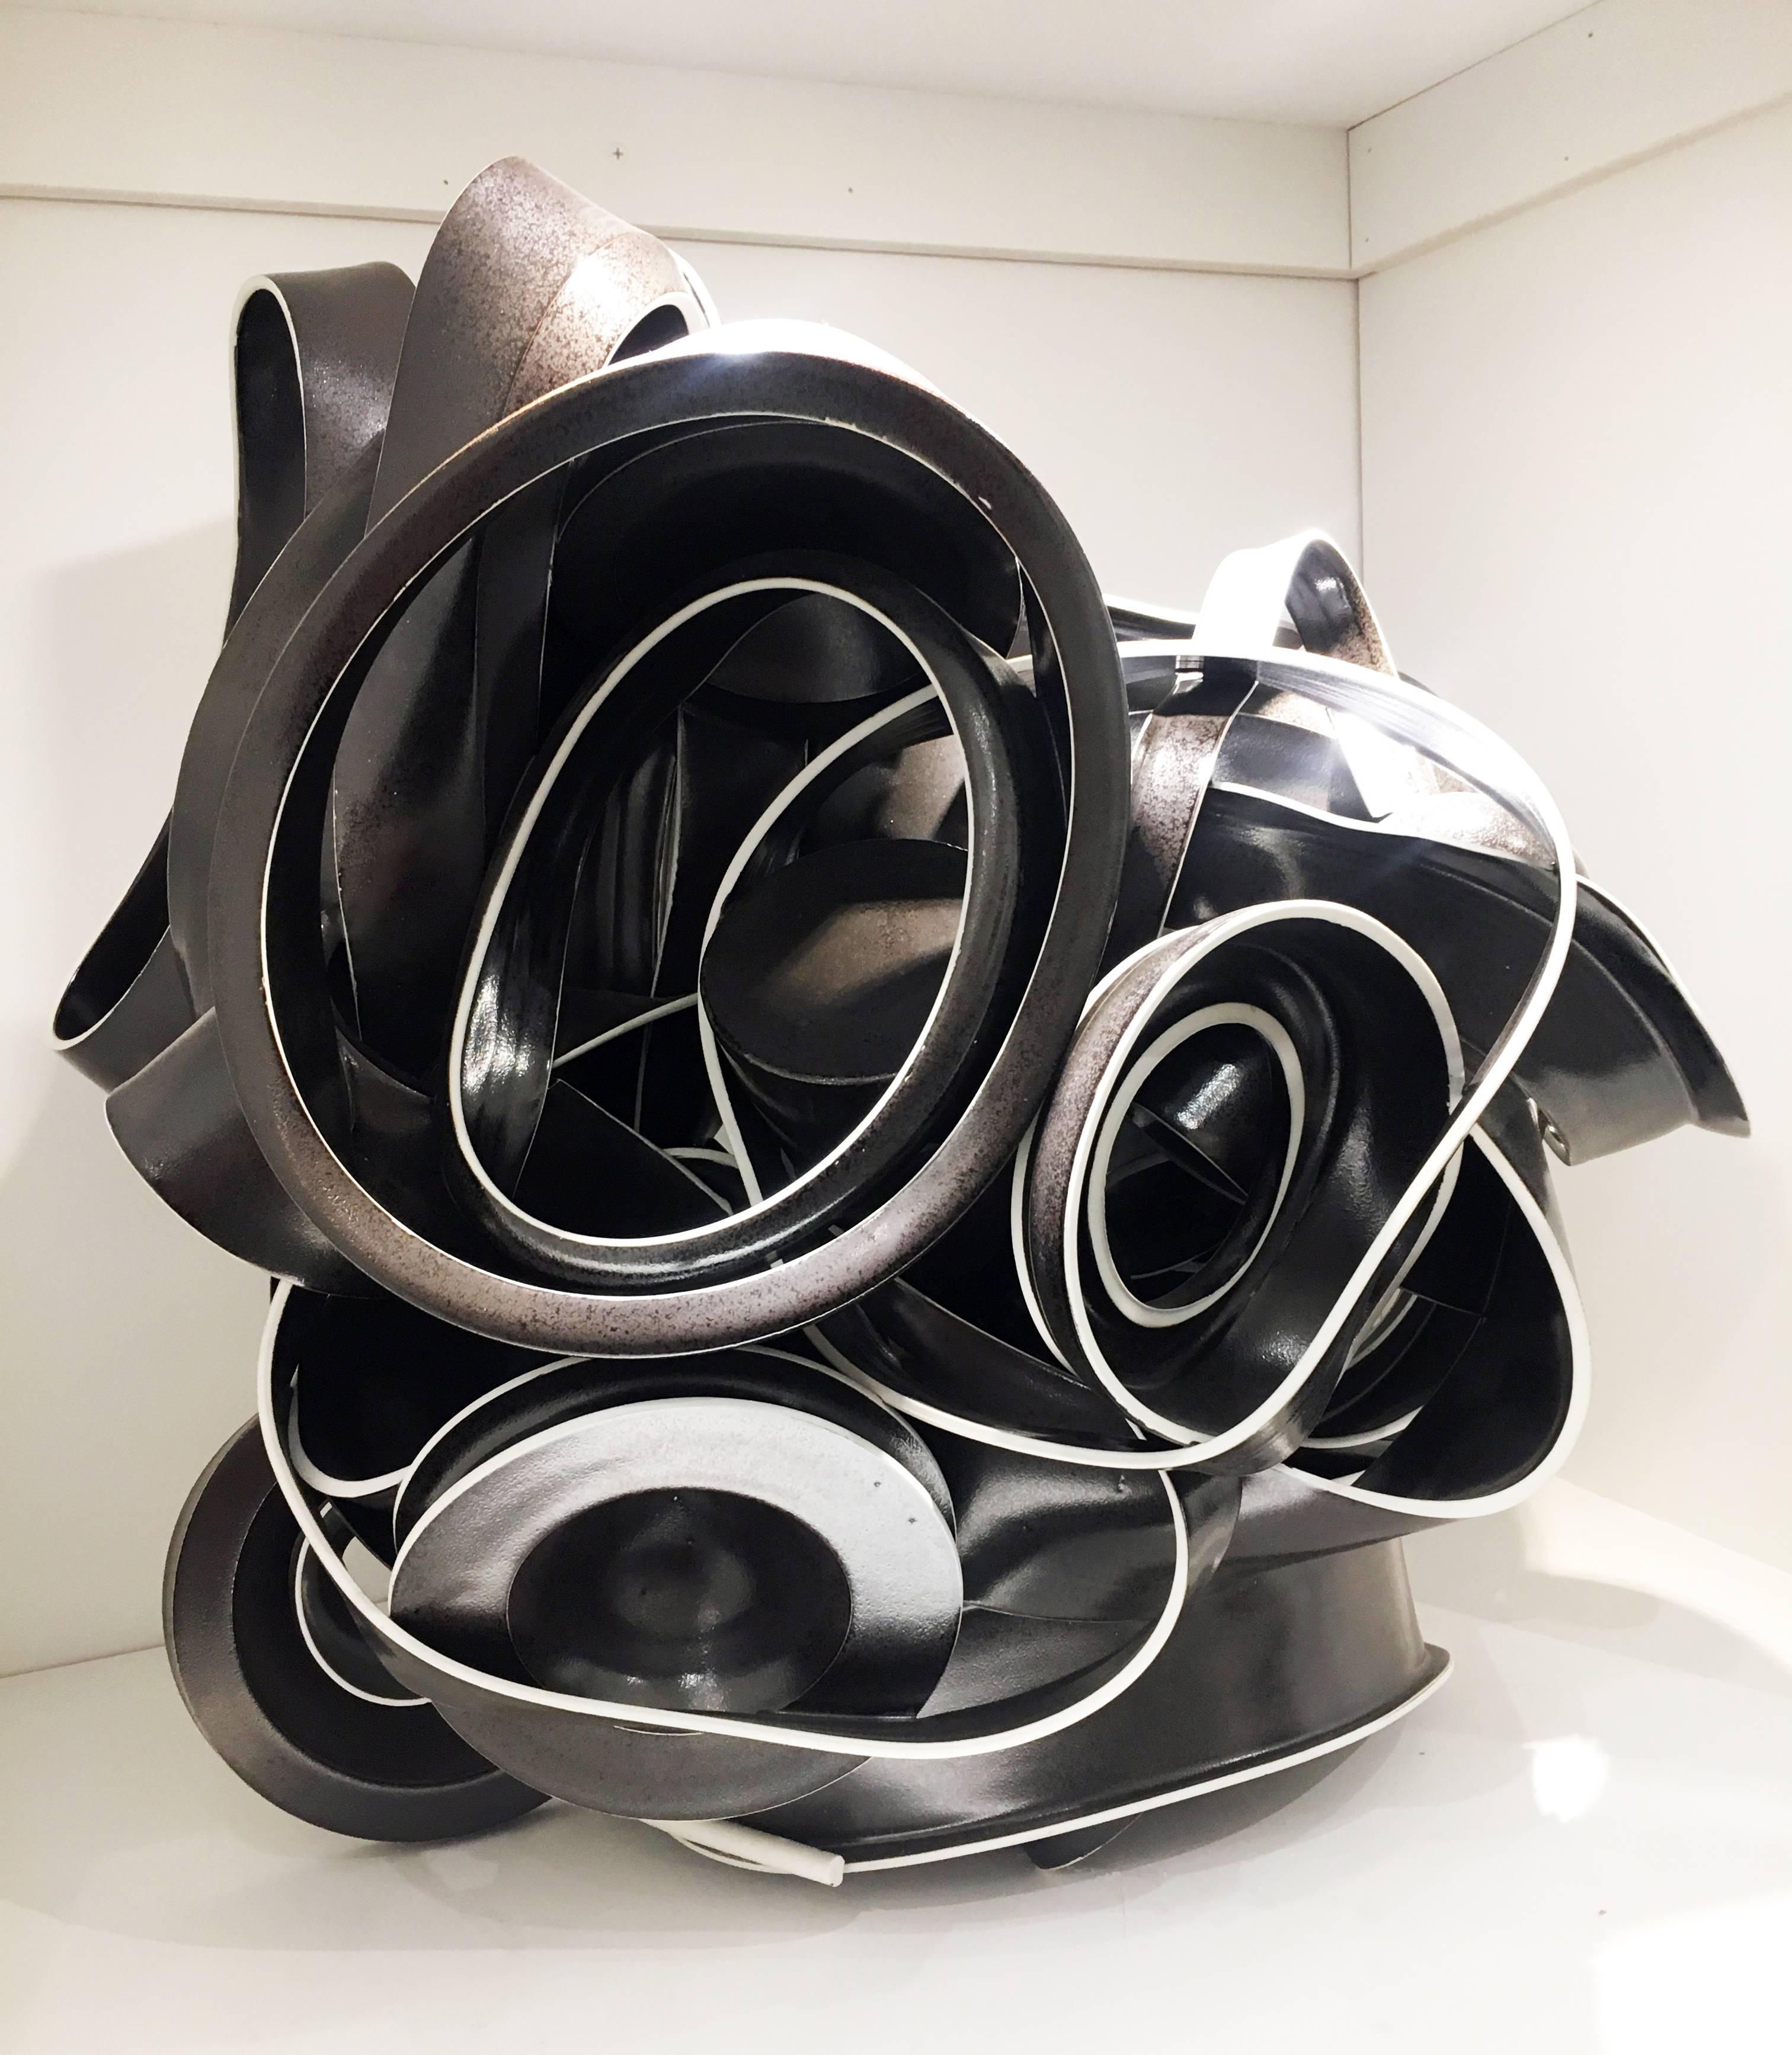 Ryan LaBar Abstract Sculpture - "Unsafe At Any Dose", Contemporary, Abstract, Ceramic, Sculpture, Black & White